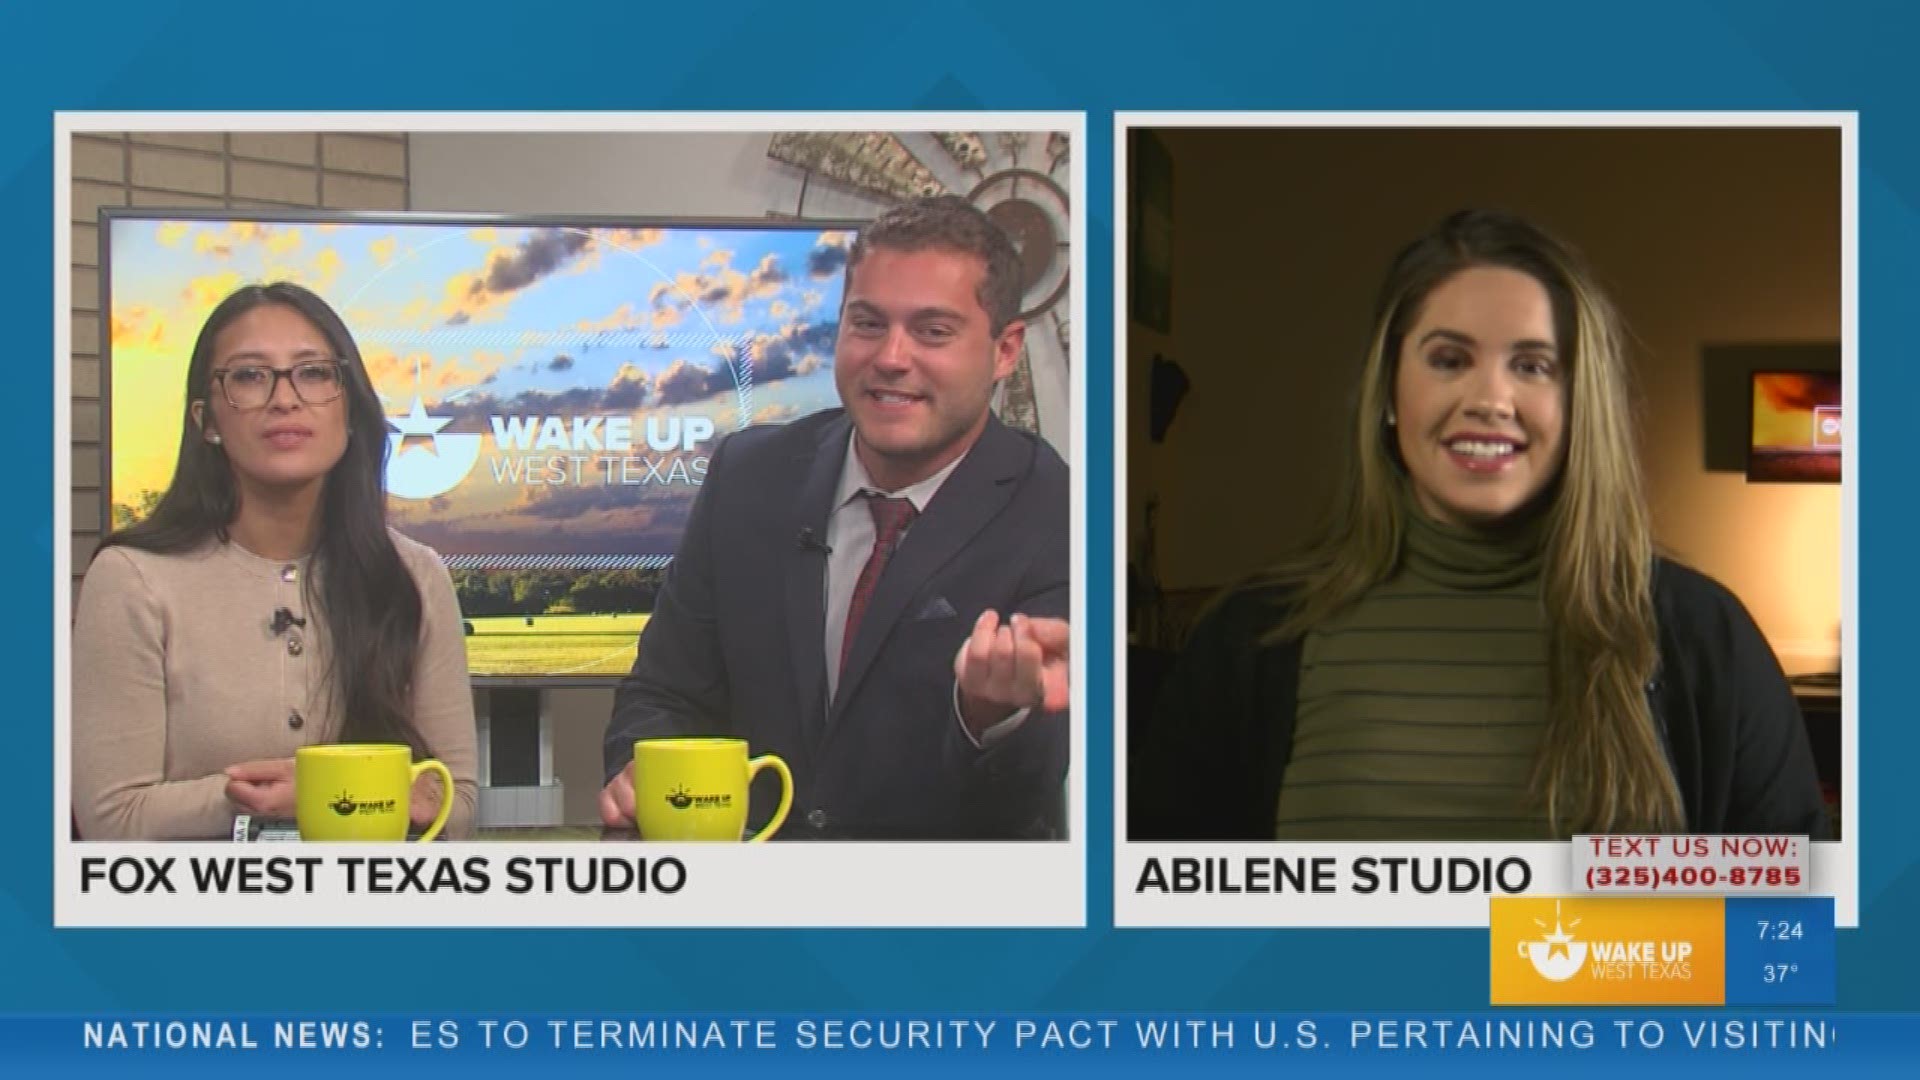 Disneyland raises ticket prices to over $200/day. Joe DeCarlo, Camille Requiestas, and Lexis Greene discuss how twitter is reacting this morning.